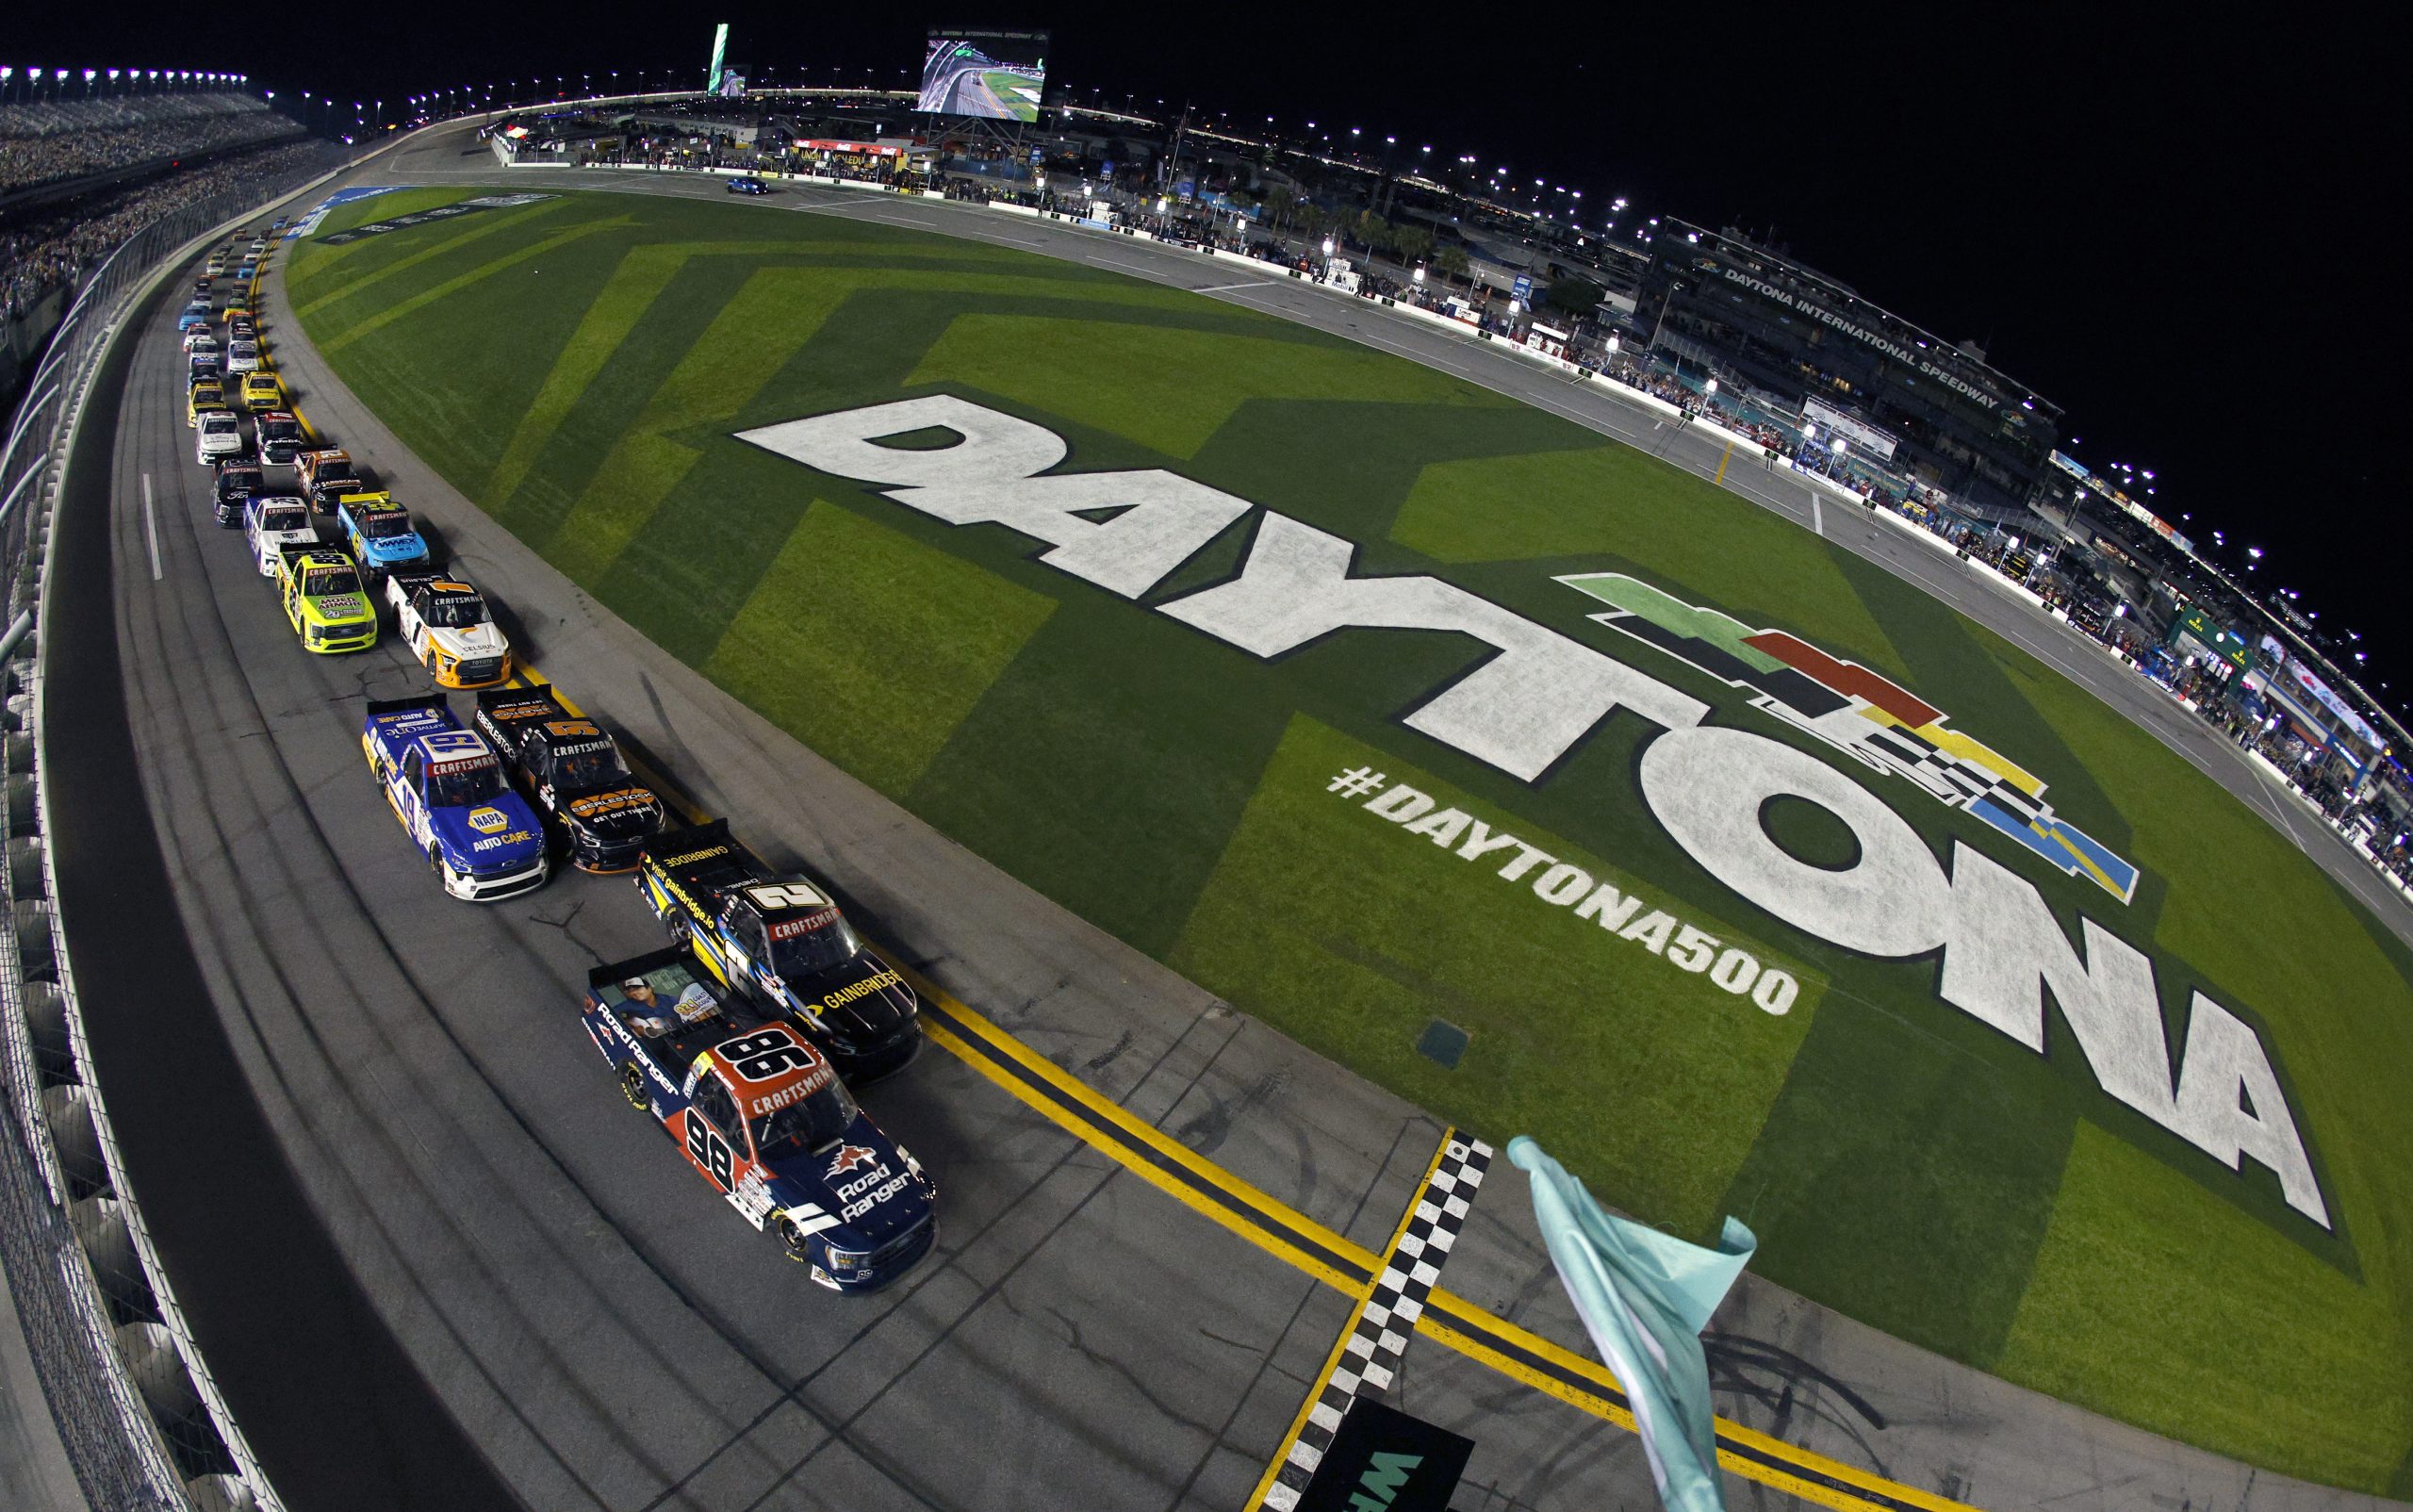 Ty Majeski, driver of the #98 Road Ranger Ford, and Nick Sanchez, driver of the #2 Gainbridge Chevrolet, lead the field to the green flag to start during the NASCAR Craftsman Truck Series NextEra Energy 250 at Daytona International Speedway on February 17, 2023 in Daytona Beach, Florida.